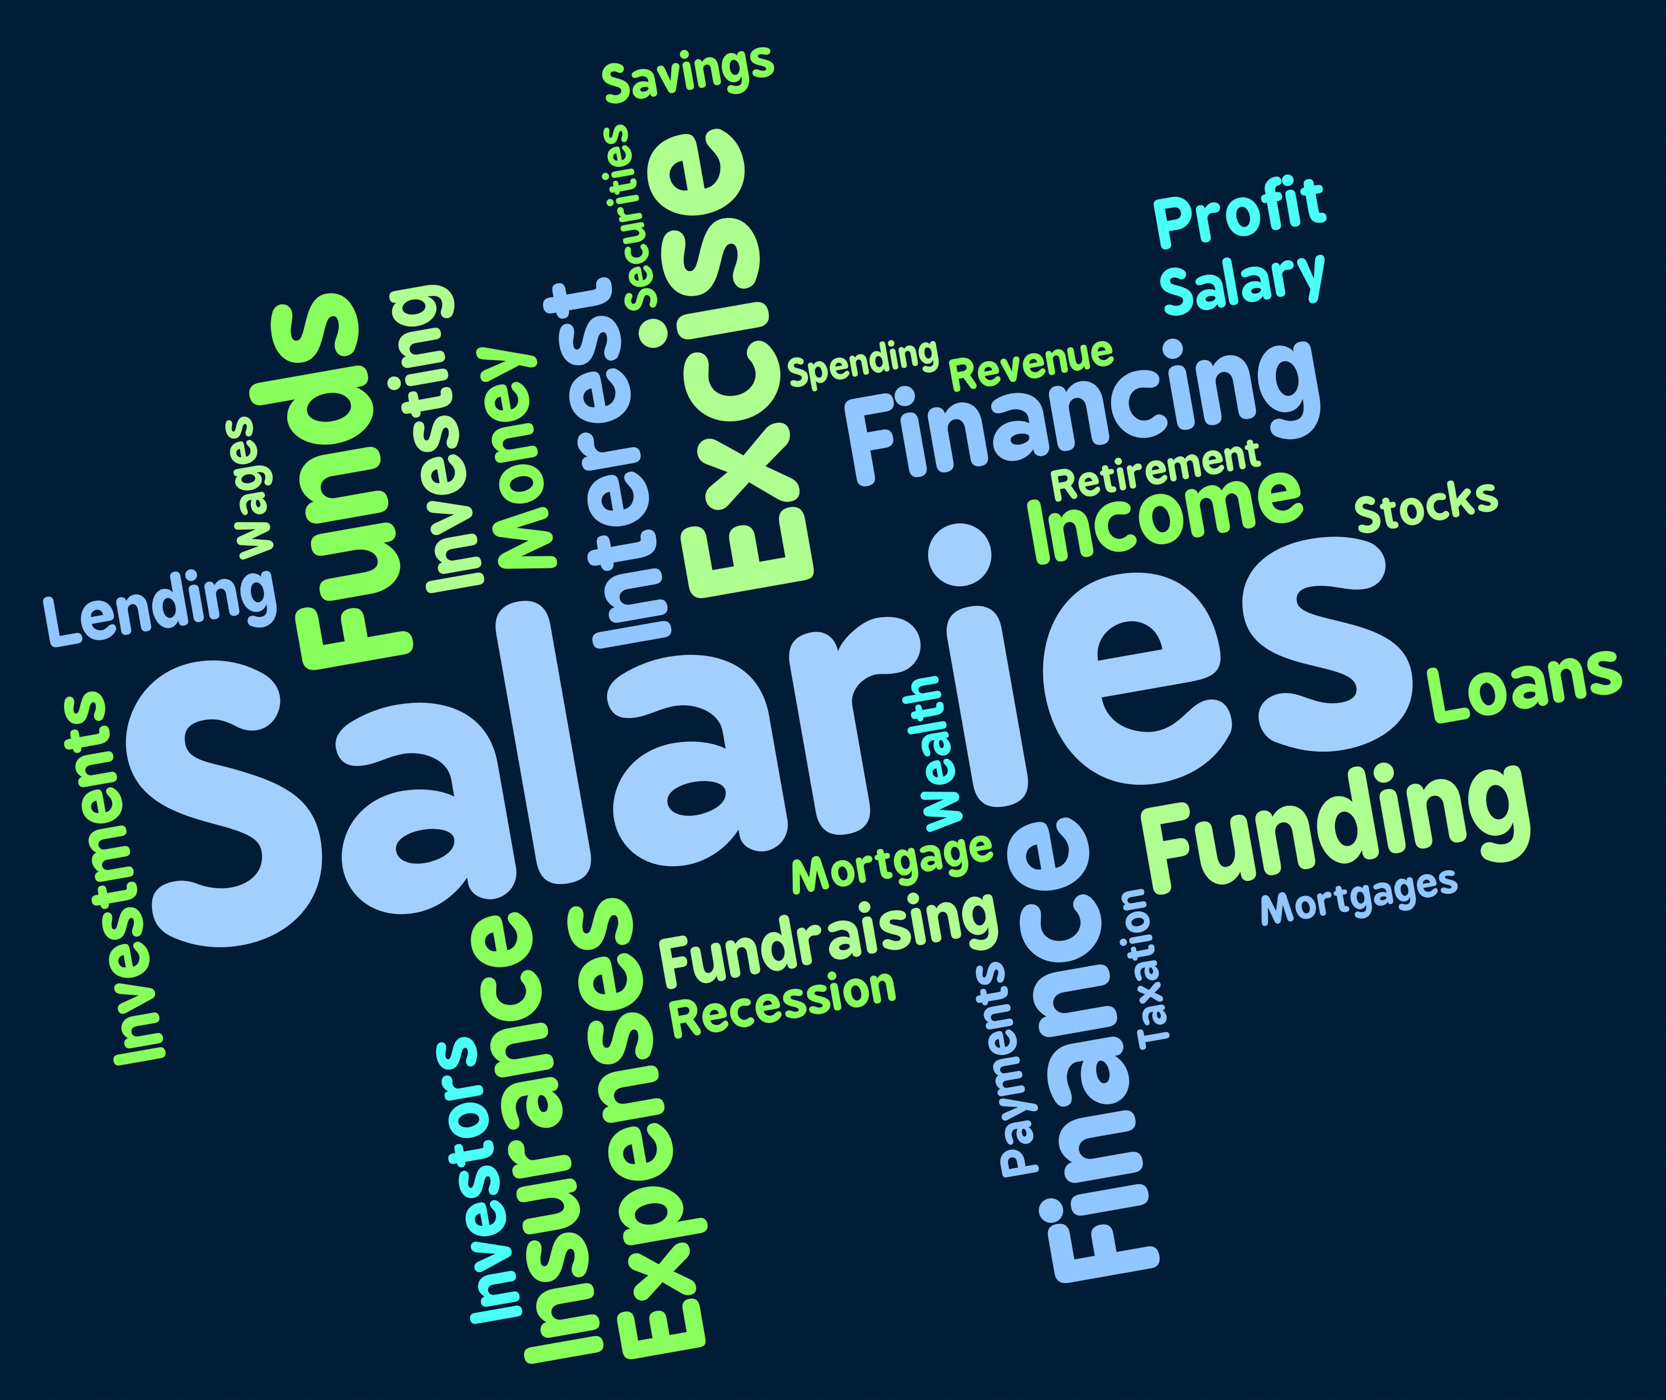 Salaries word represents remuneration wage and workers photo